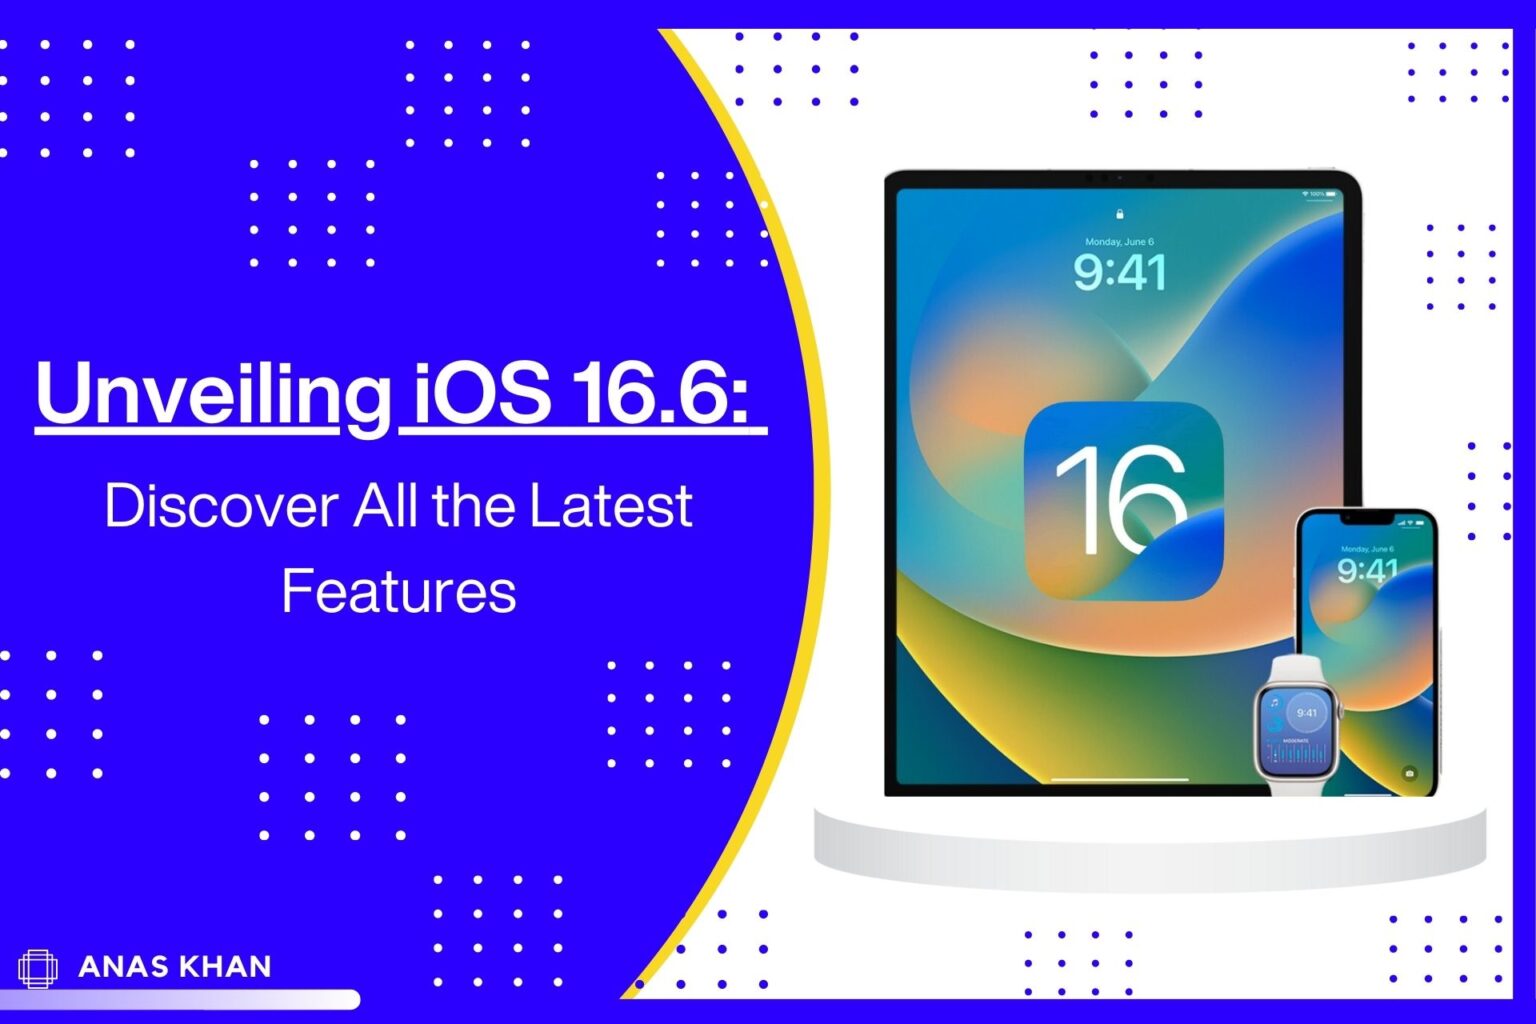 Unveiling iOS 16.6: Discover All the Latest Features